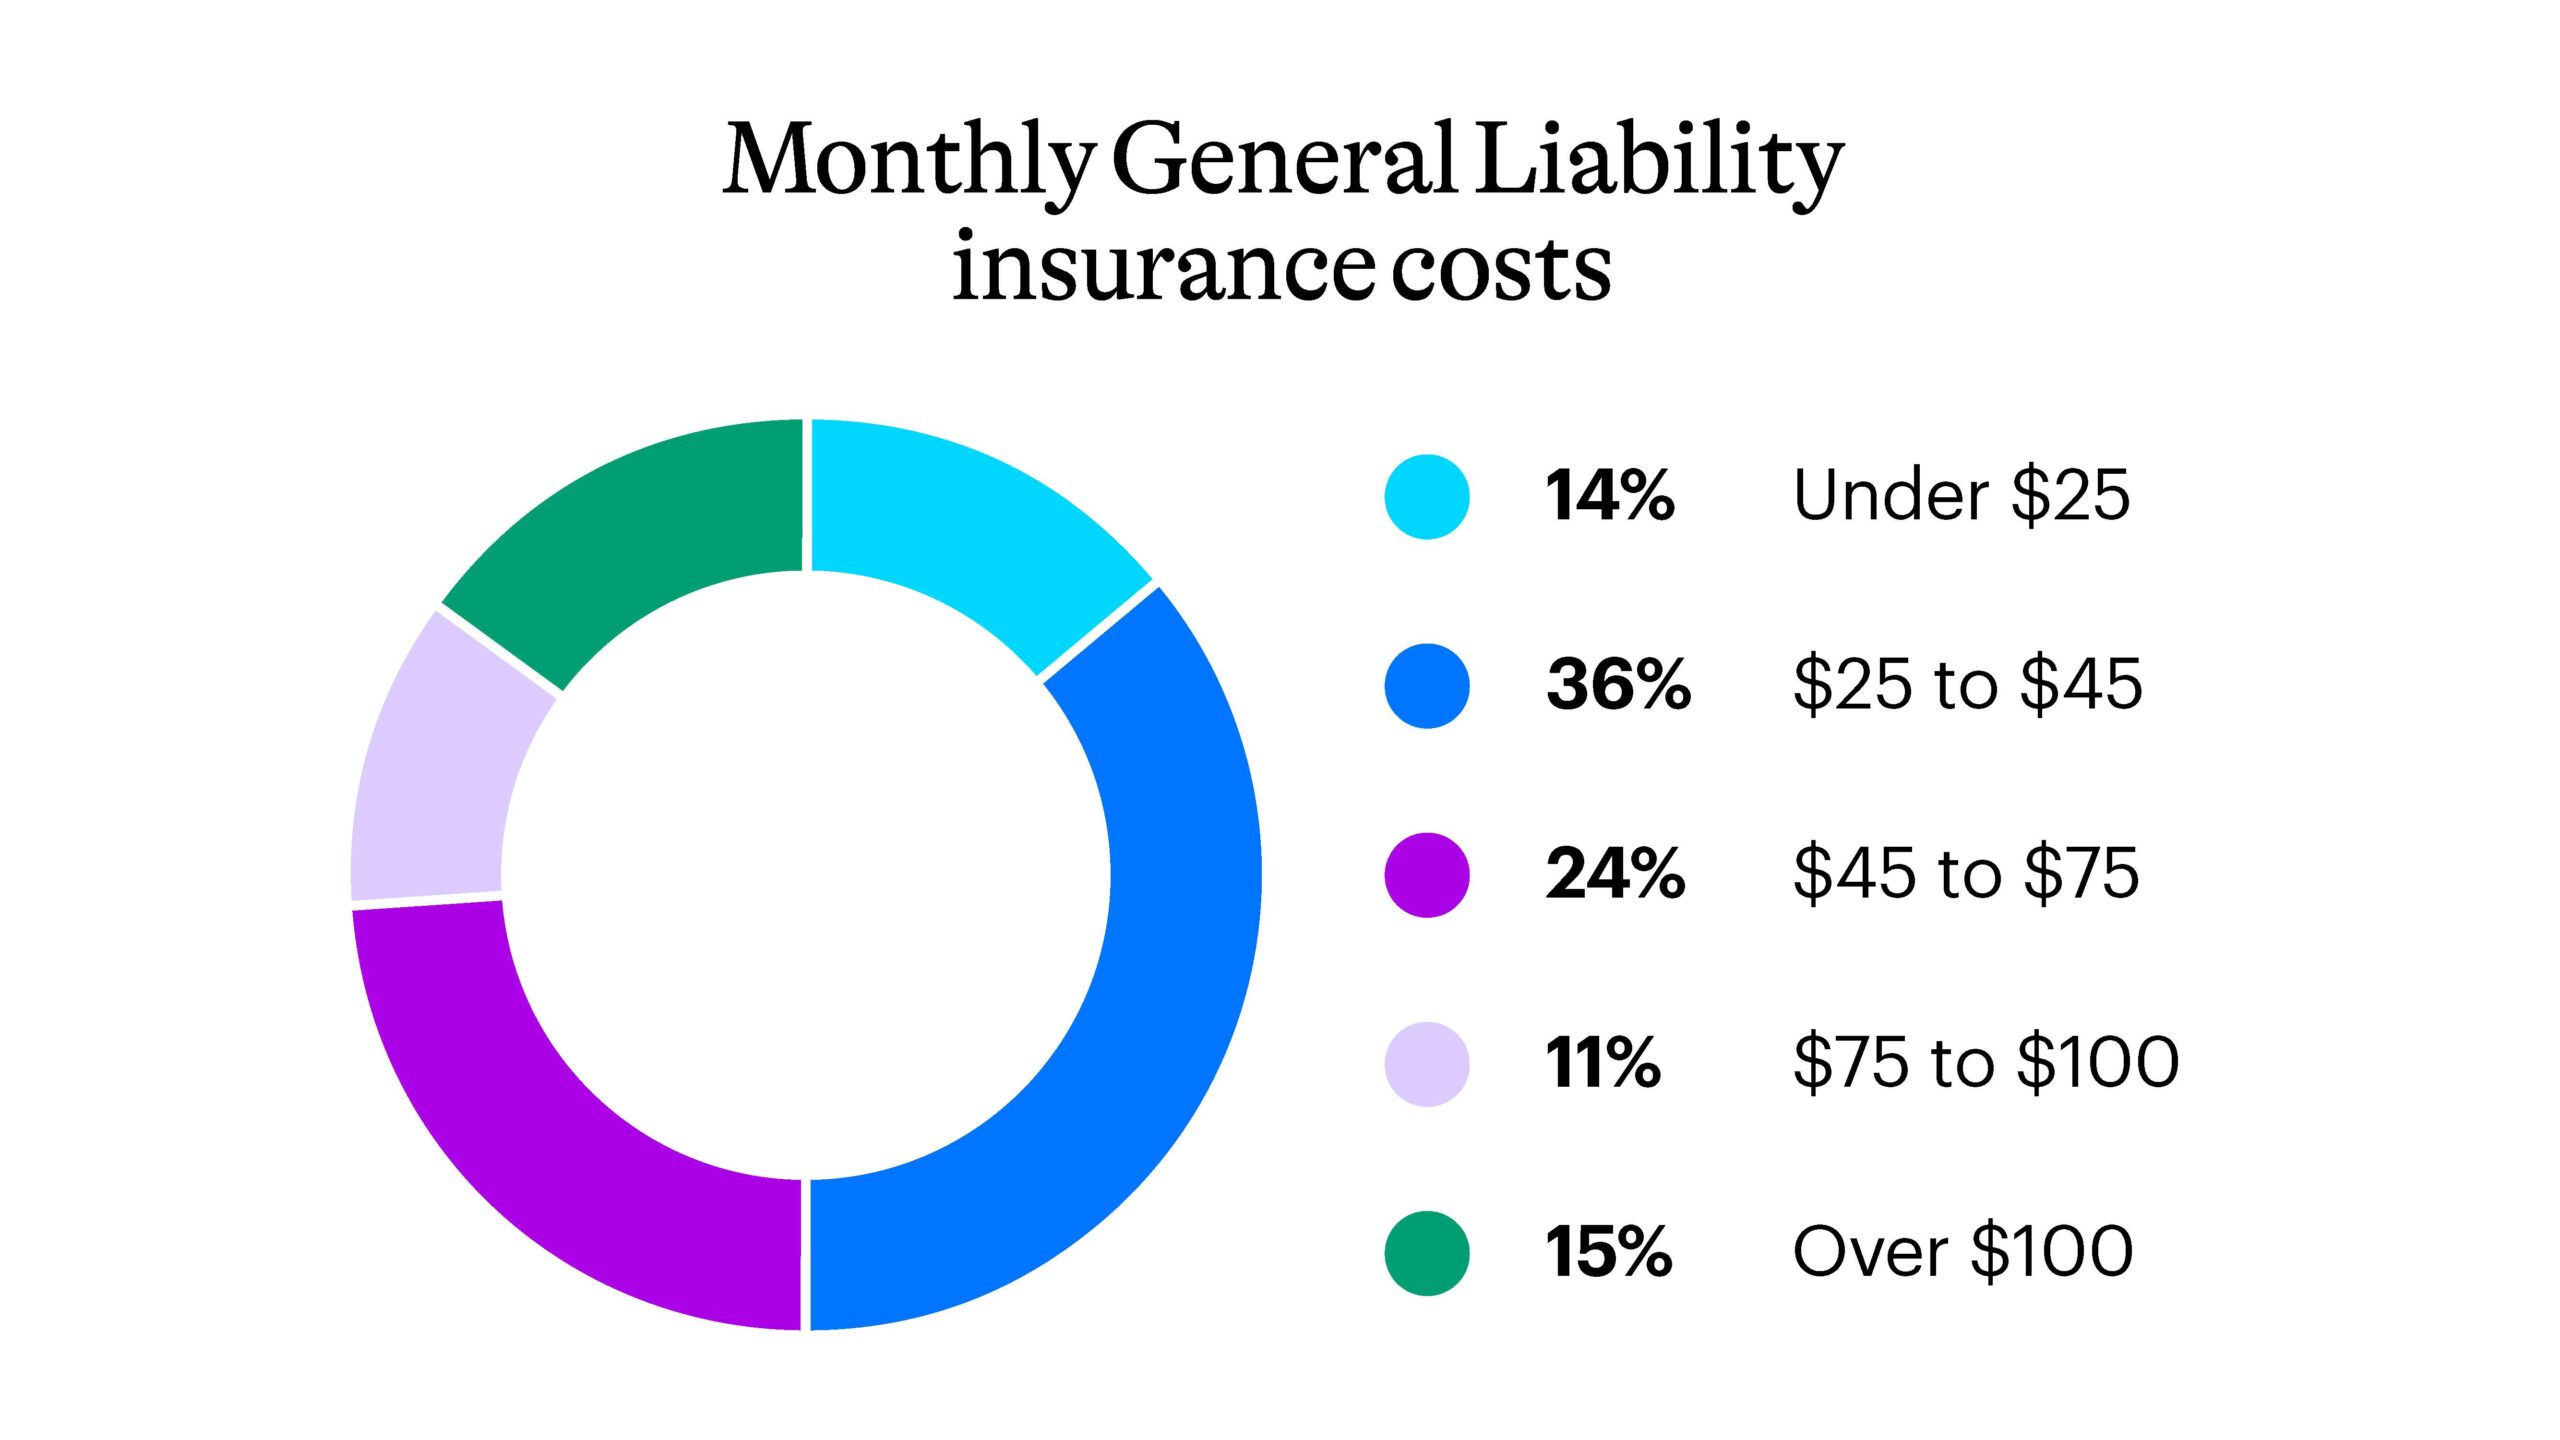 Monthly General Liability insurance costs